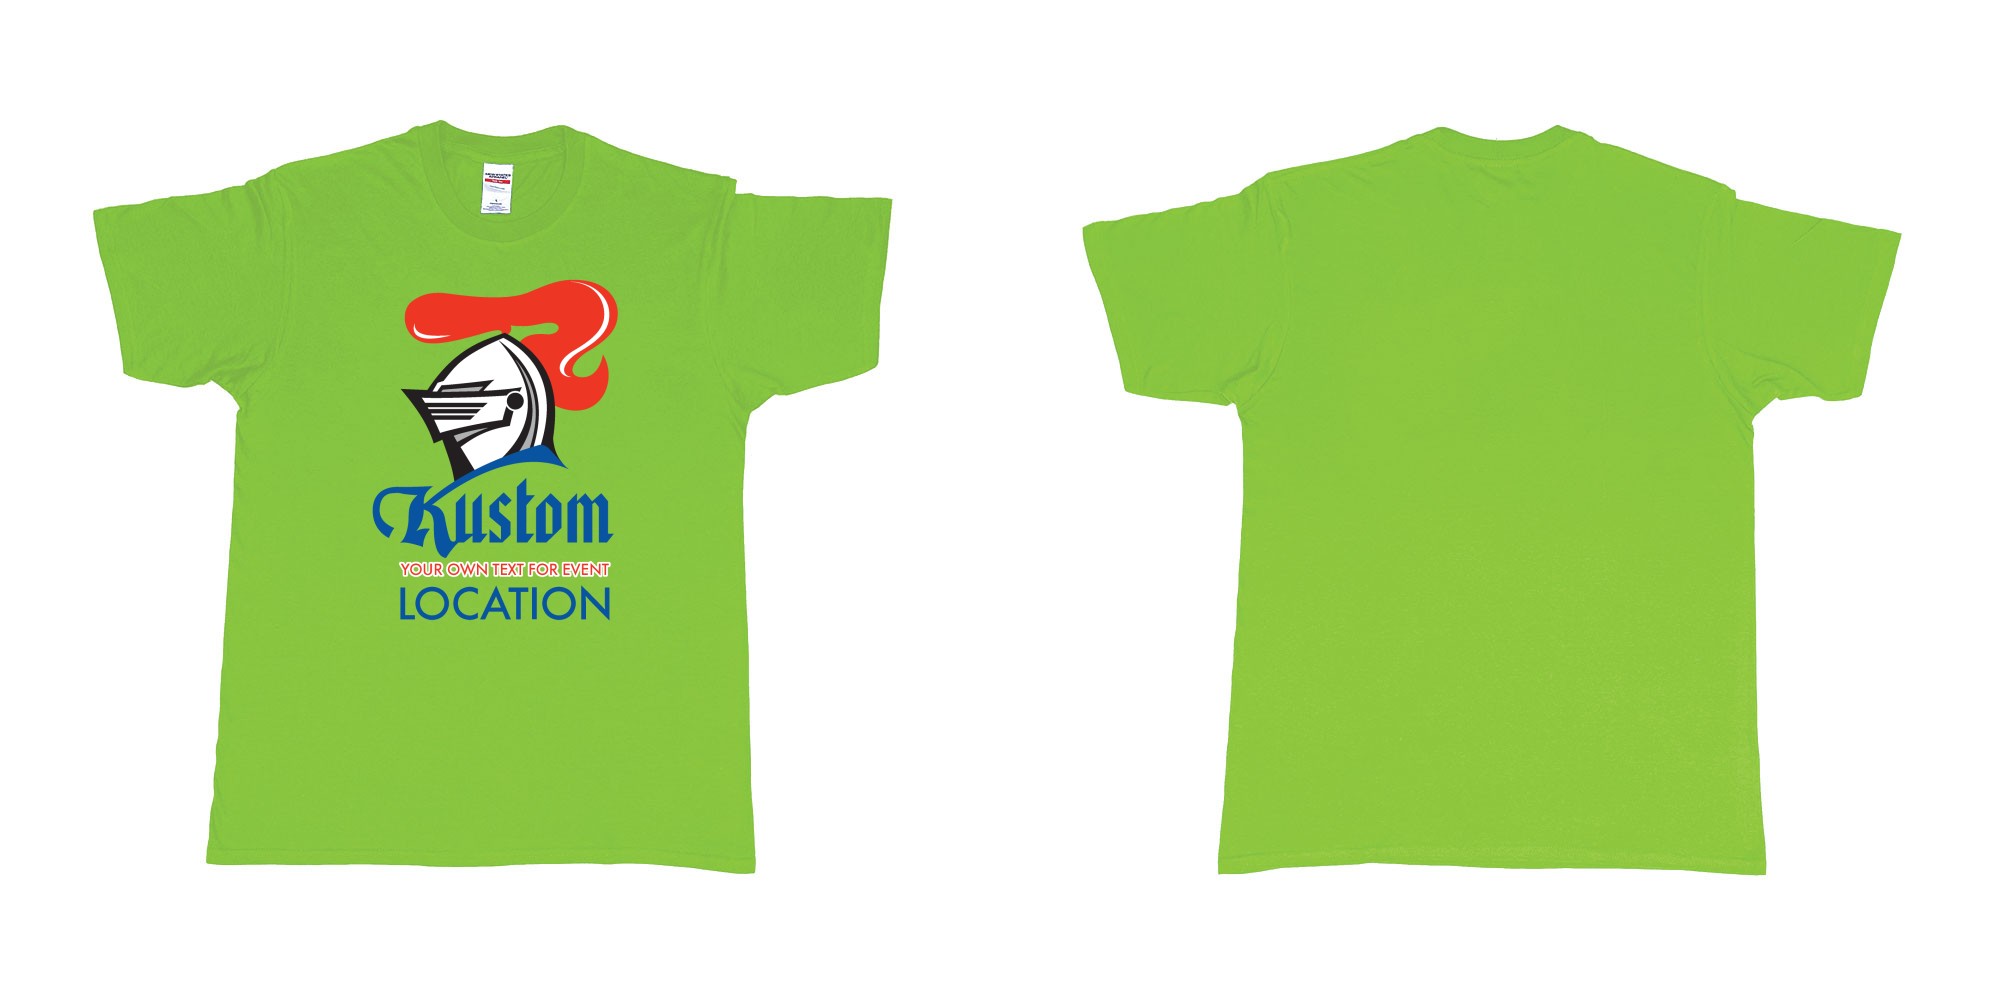 Custom tshirt design newcastle knights rugby league team custom event teeshirt in fabric color lime choice your own text made in Bali by The Pirate Way